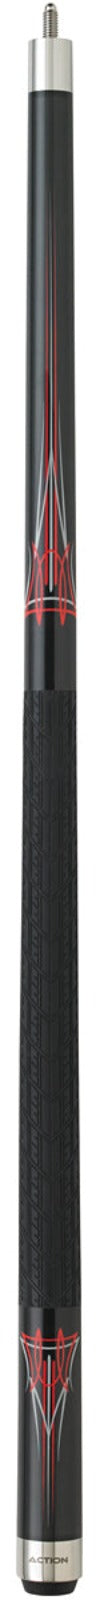 Action Action KRM03 Pool Cue Pool Cue